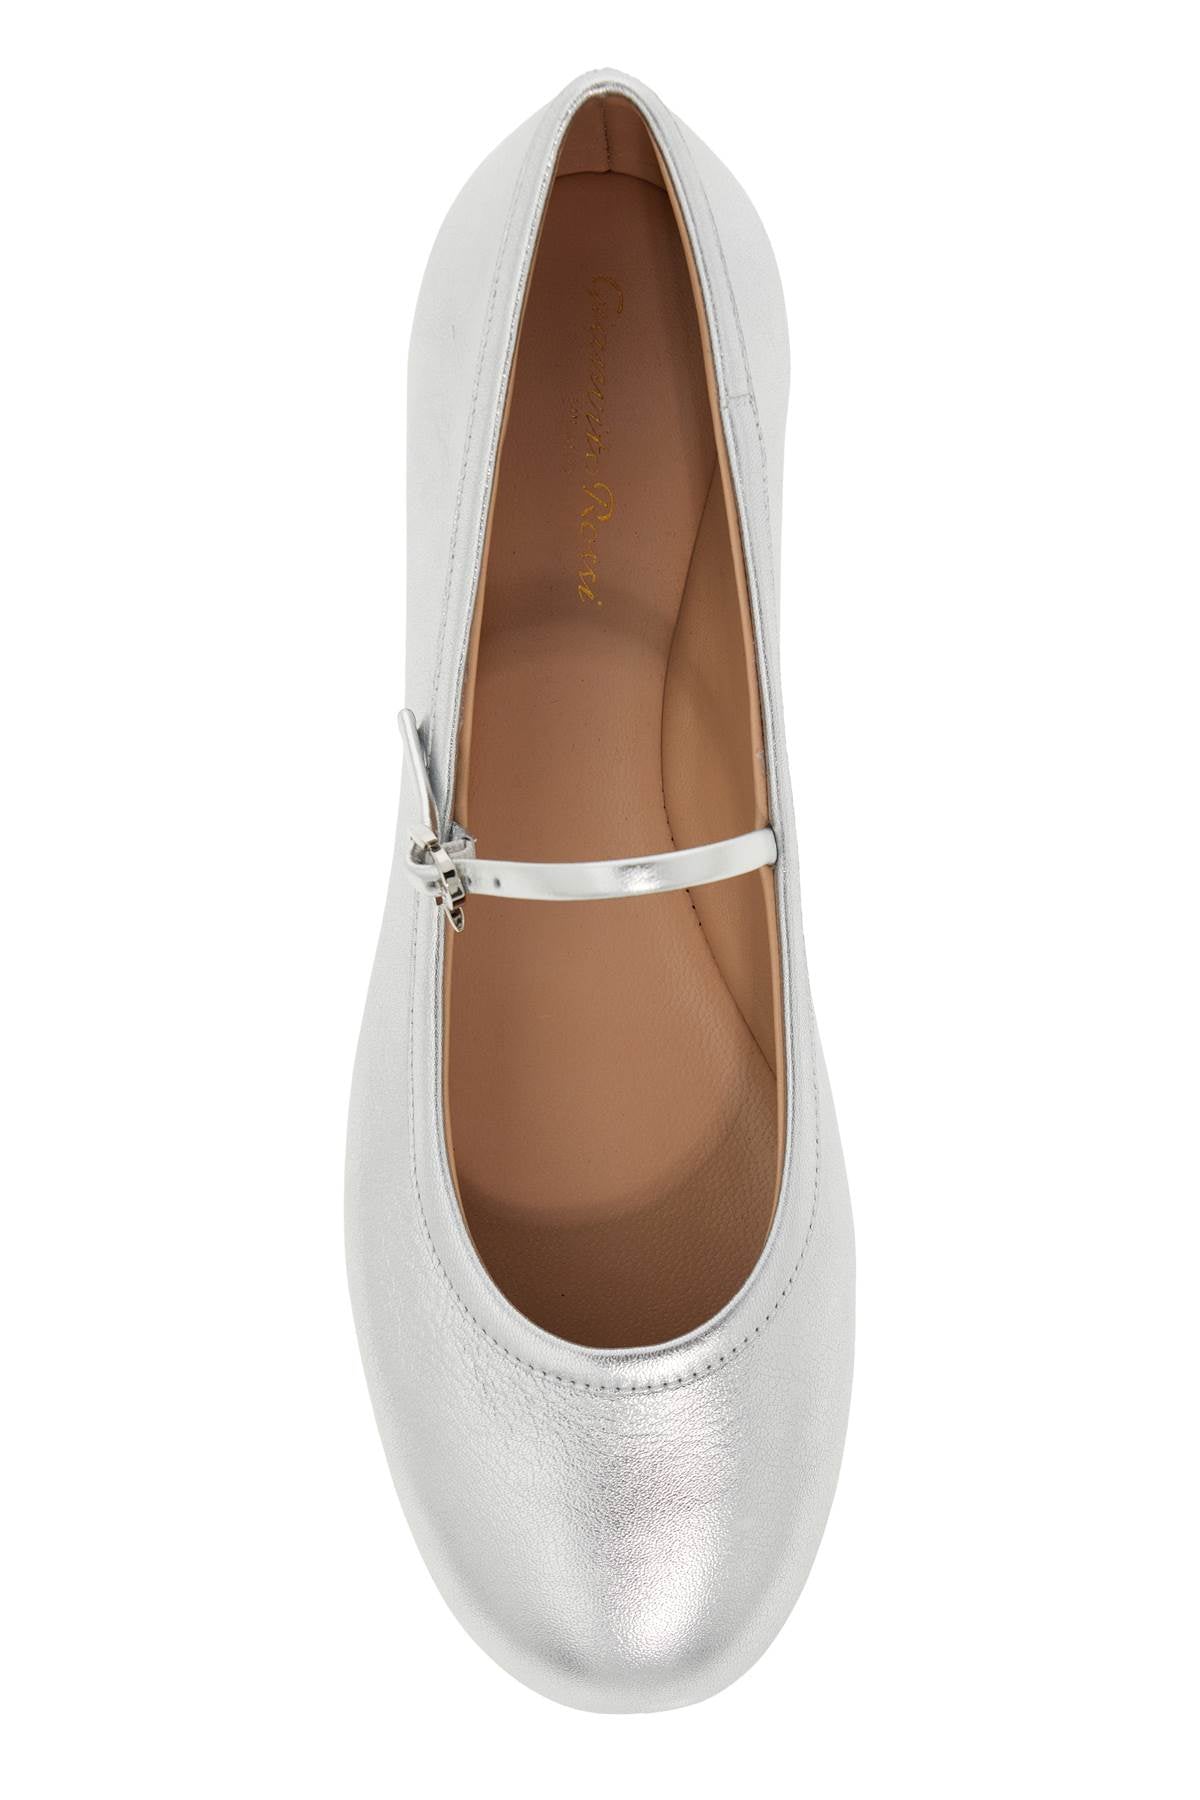 GIANVITO ROSSI Silver Laminated Leather Ballerinas with Mary Jane Design for Women